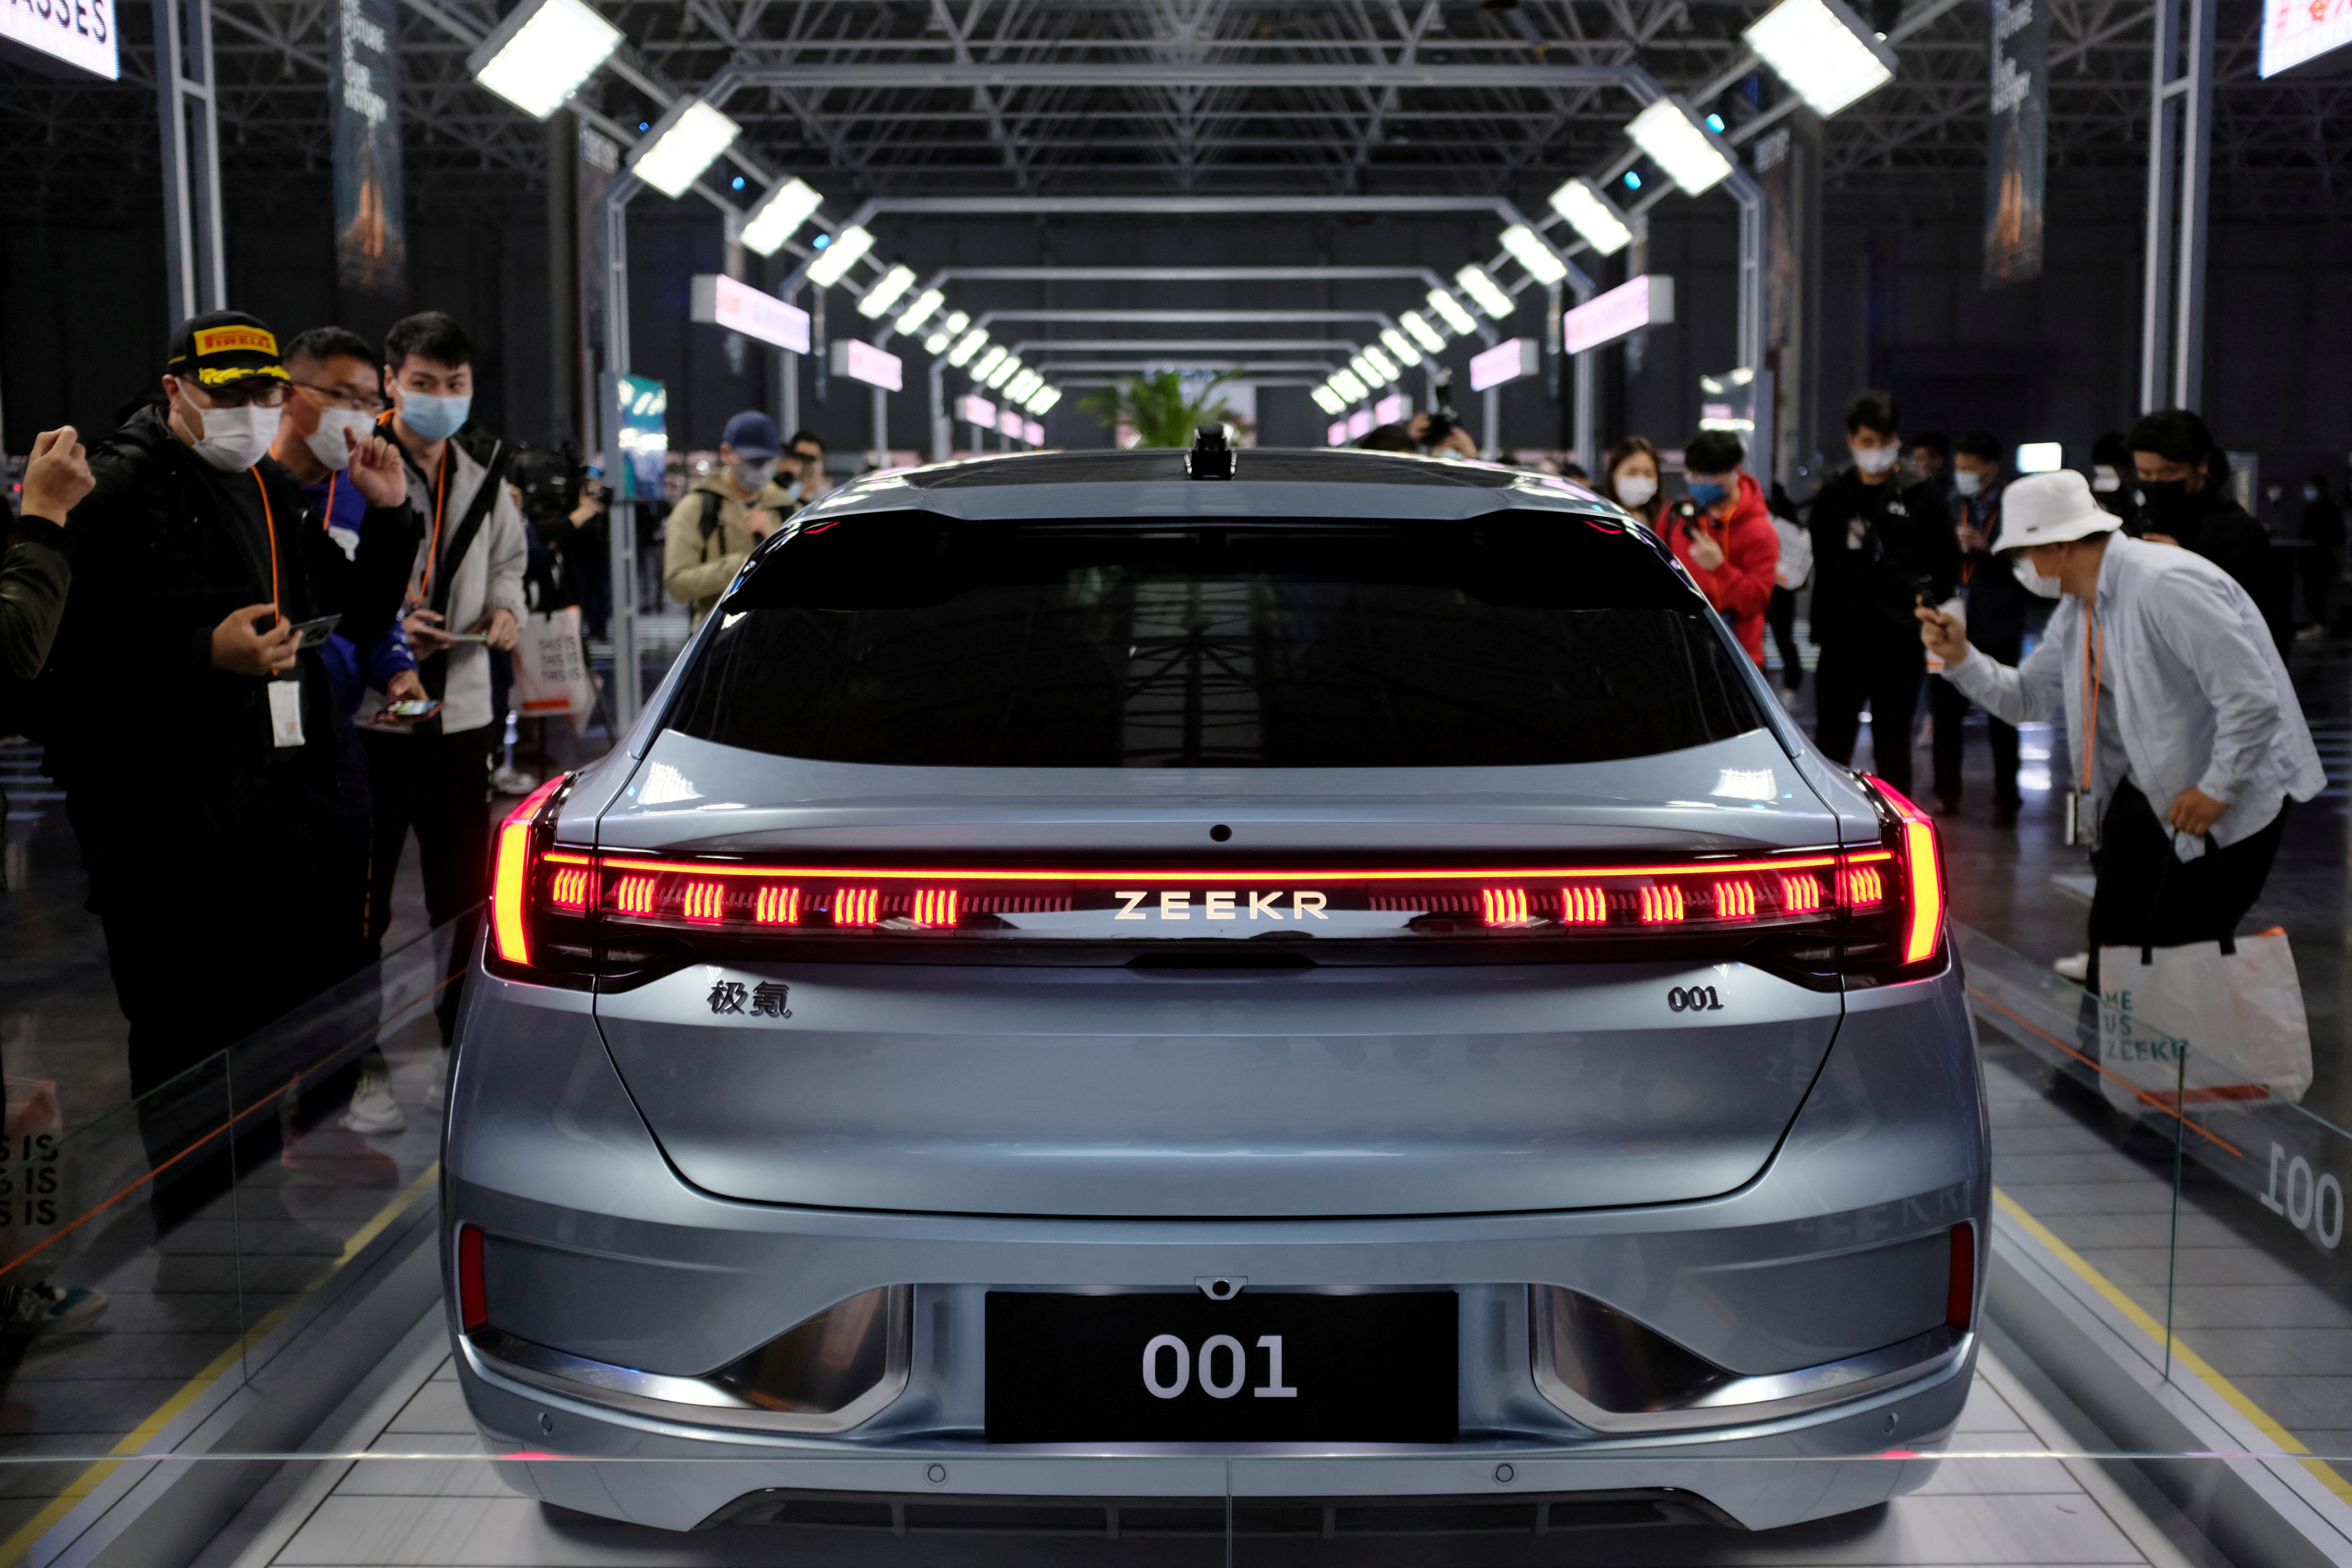 Visitors check out a Zeekr 001 at Zeekr’s factory in Ningbo, Zhejiang province, China on April 15, 2021. Photo: Reuters